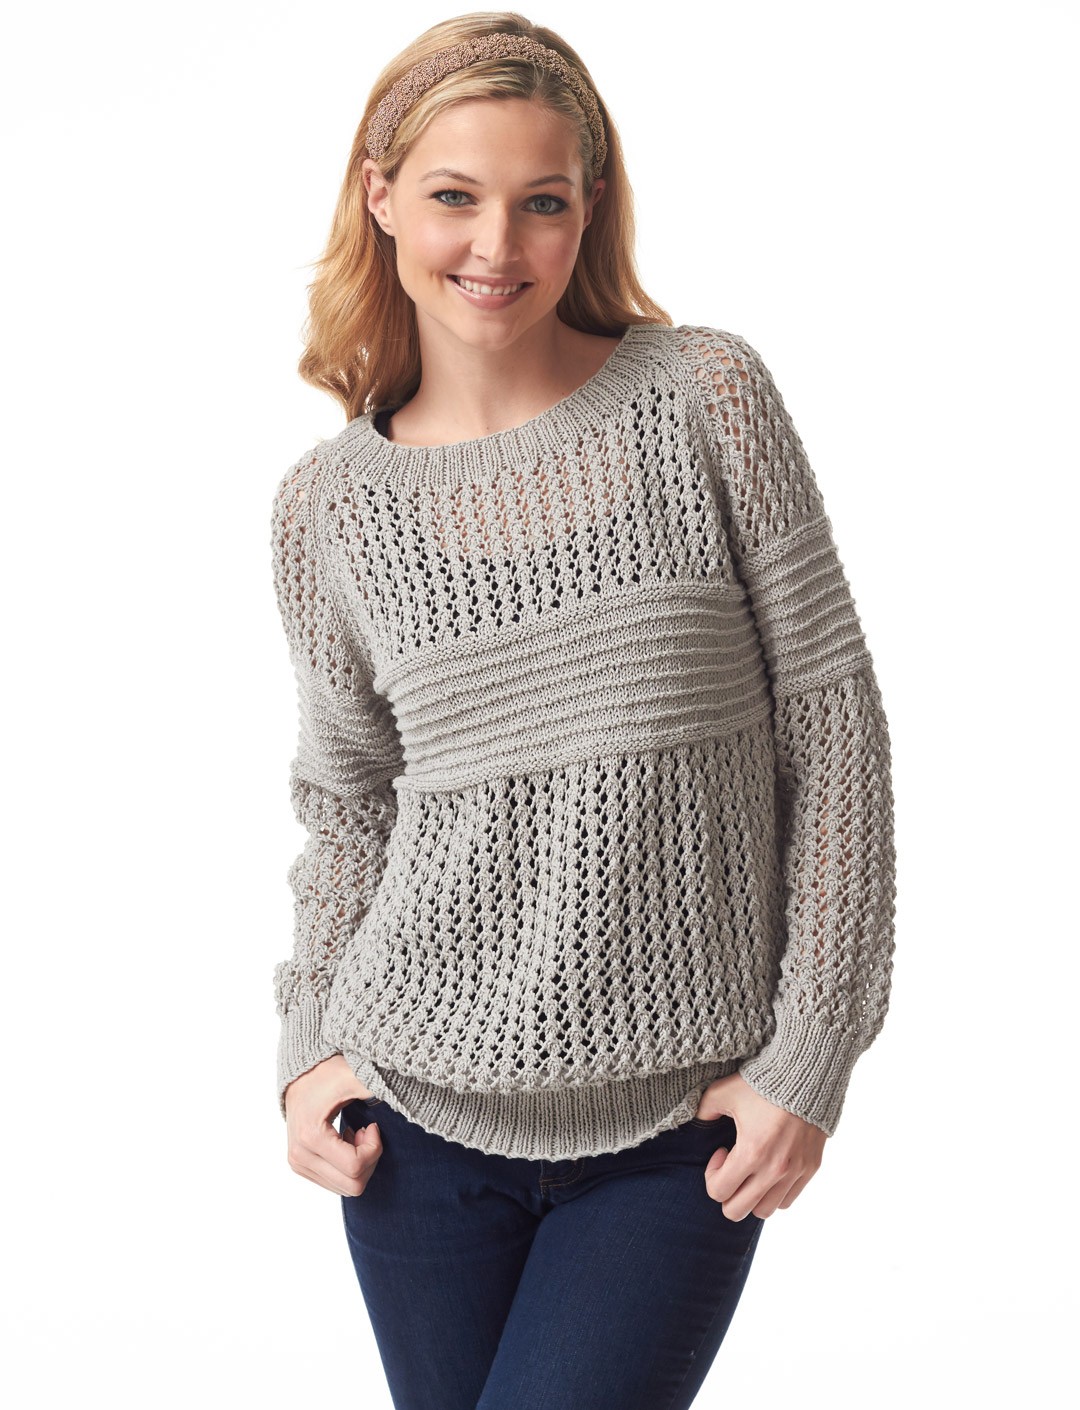 Lace Pullover Knitting Patterns | In the Loop Knitting